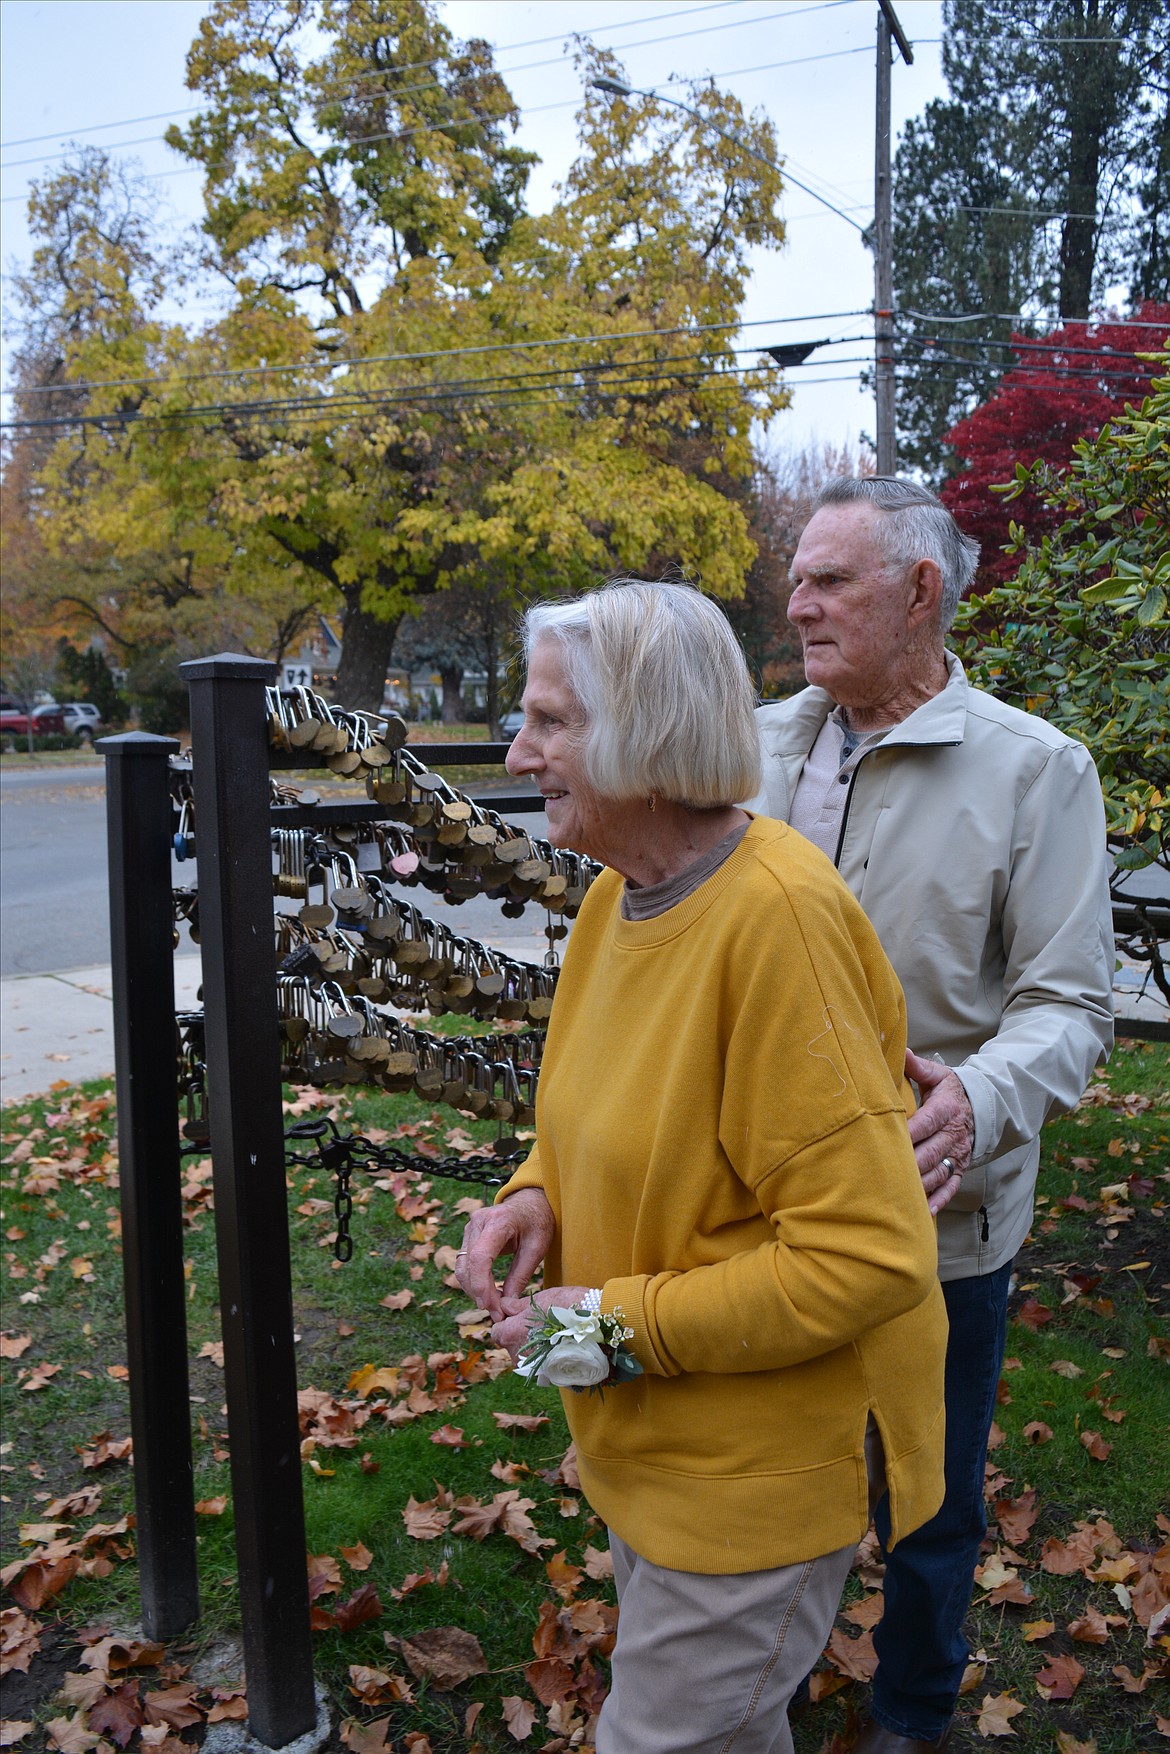 Marilyn and Paul Peterson were surprised by their family when they had a repeat of their initial wedding 60 years later on Oct. 26. They placed a lock engraved with their names outside the Hitching Post after the ceremony.